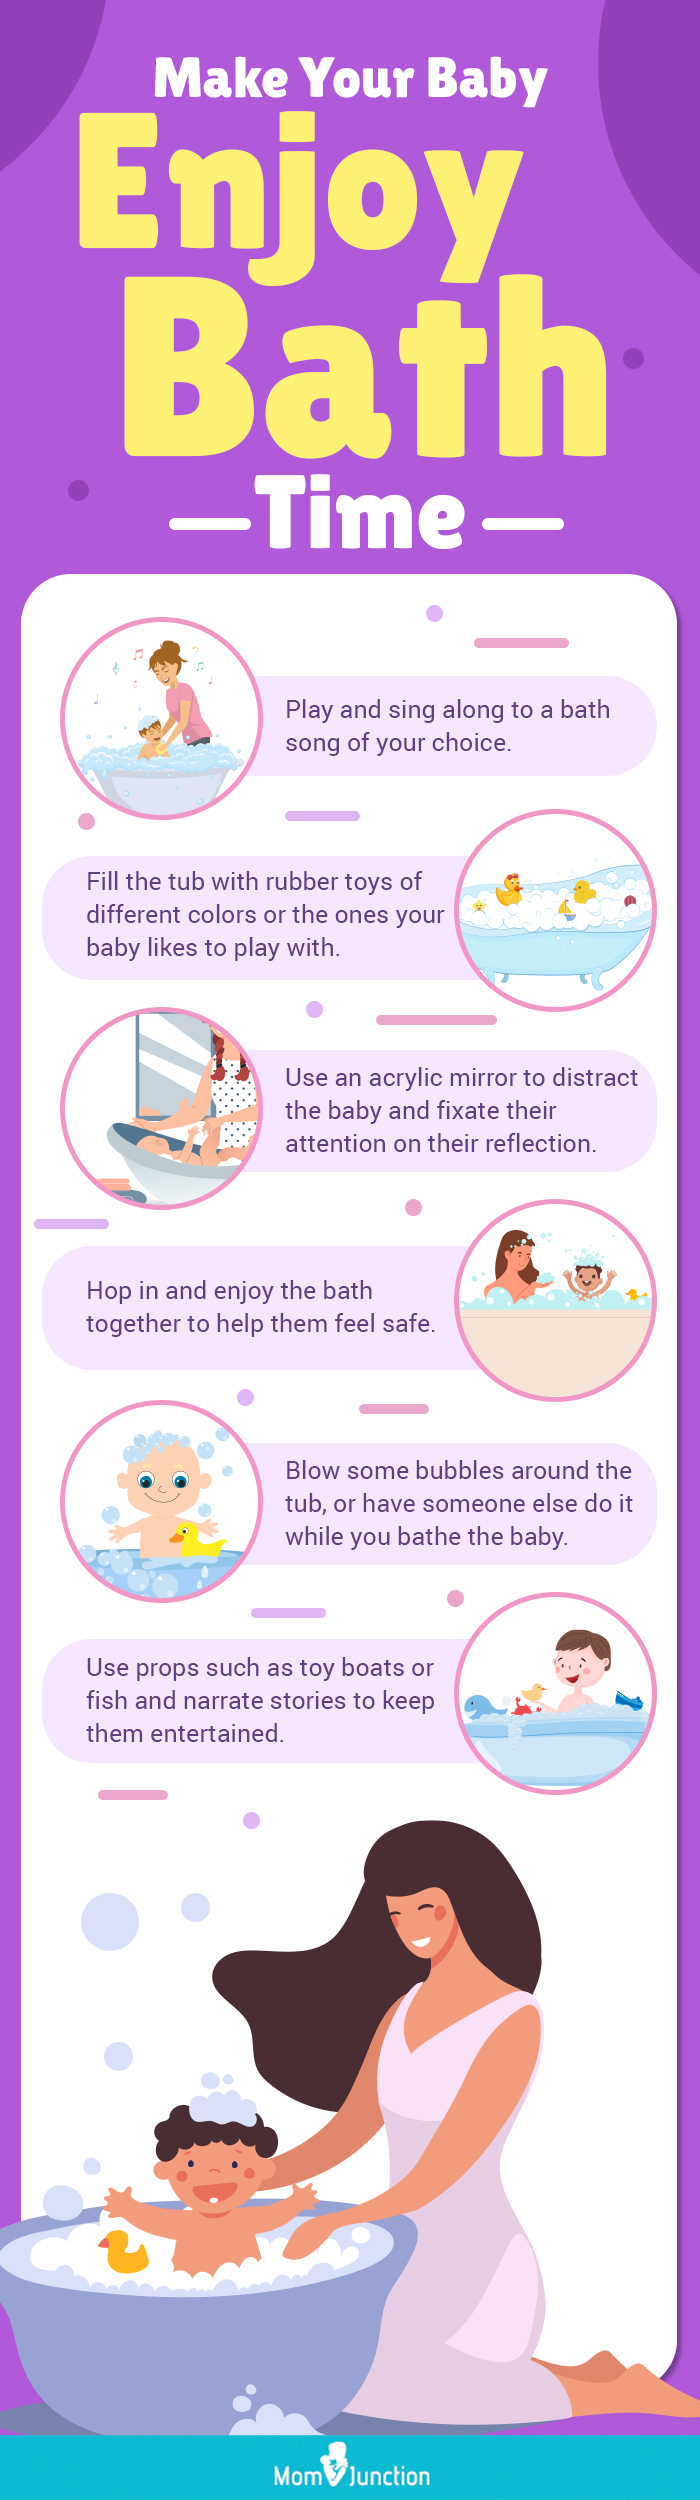 make your baby enjoy bath time (infographic)